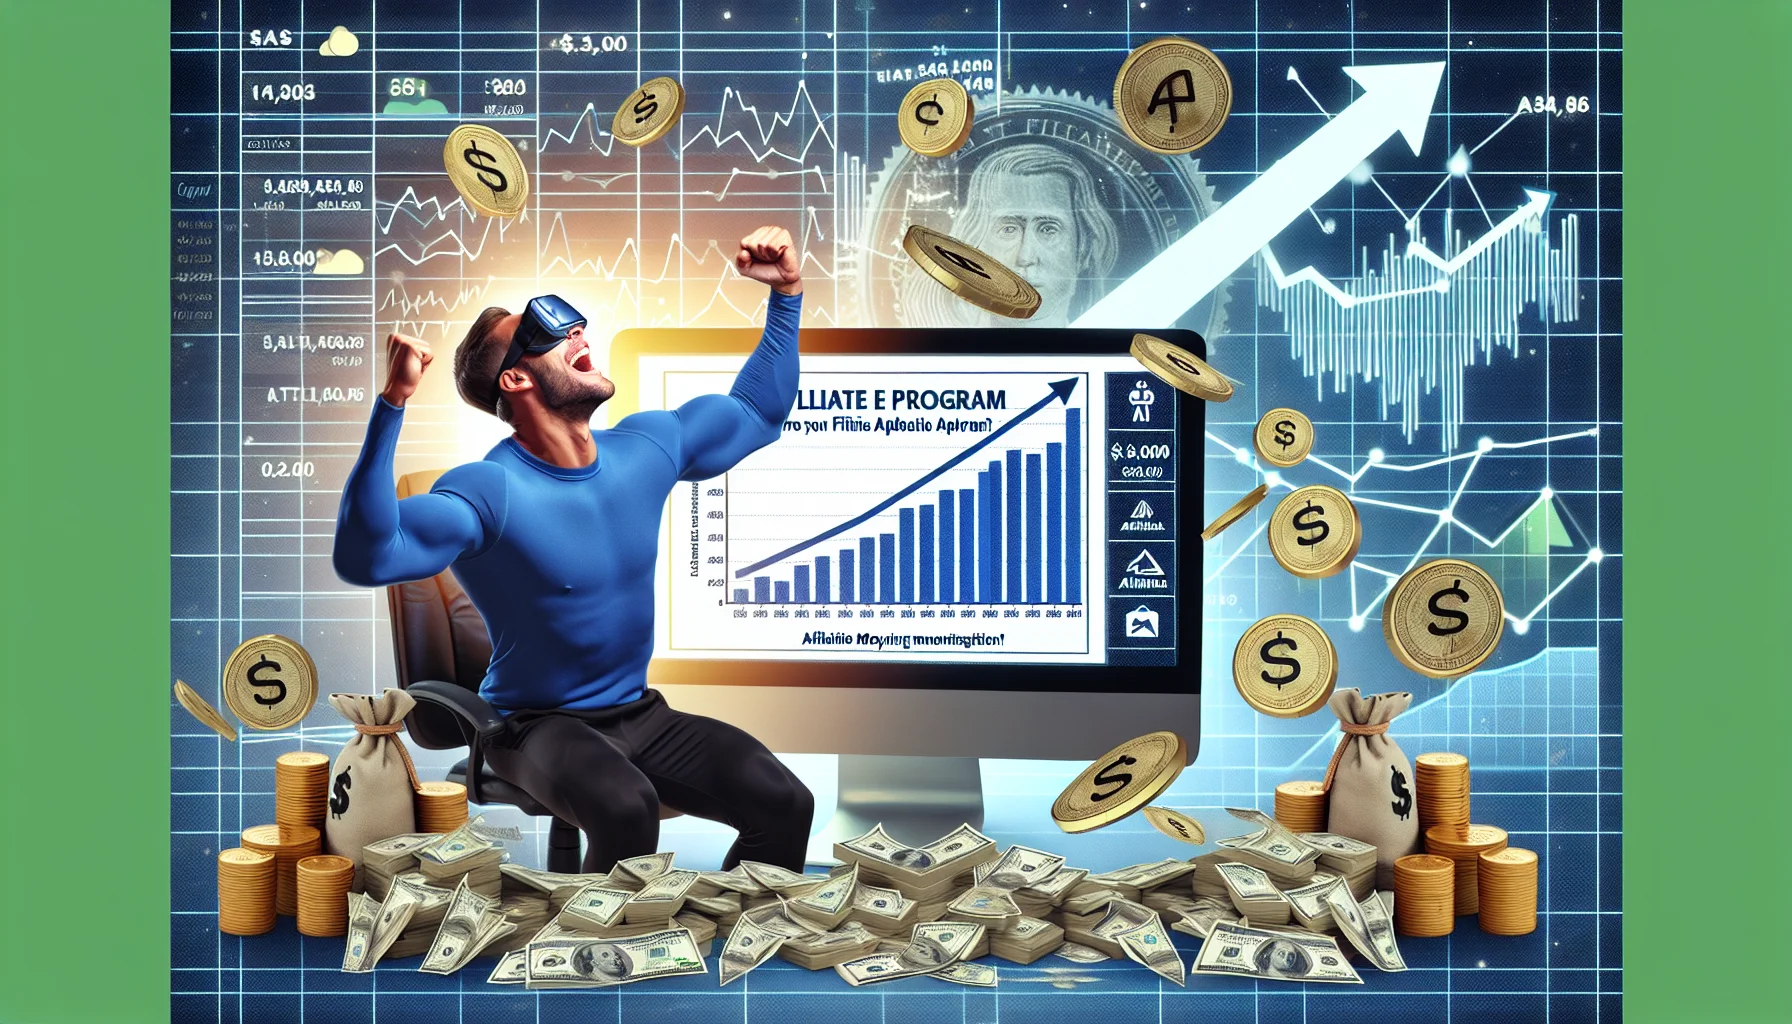 Generate an amusing and lifelike image illustrating the concept of an affiliate program for a fictitious fitness apparel brand, framed in an attractive money-making situation related to online business. The focus of the image could be a humorous depiction of an individual of undisclosed gender and race joyfully examining a computer screen that displays increasing affiliate sales statistics. Scattered around, there should be symbols denoting monetary gains such as piles of coins or cleverly designed graphs pointing upwards. Blend the elements in a way to evoke a sense of excitement and potential profitability associated with the affiliate program.